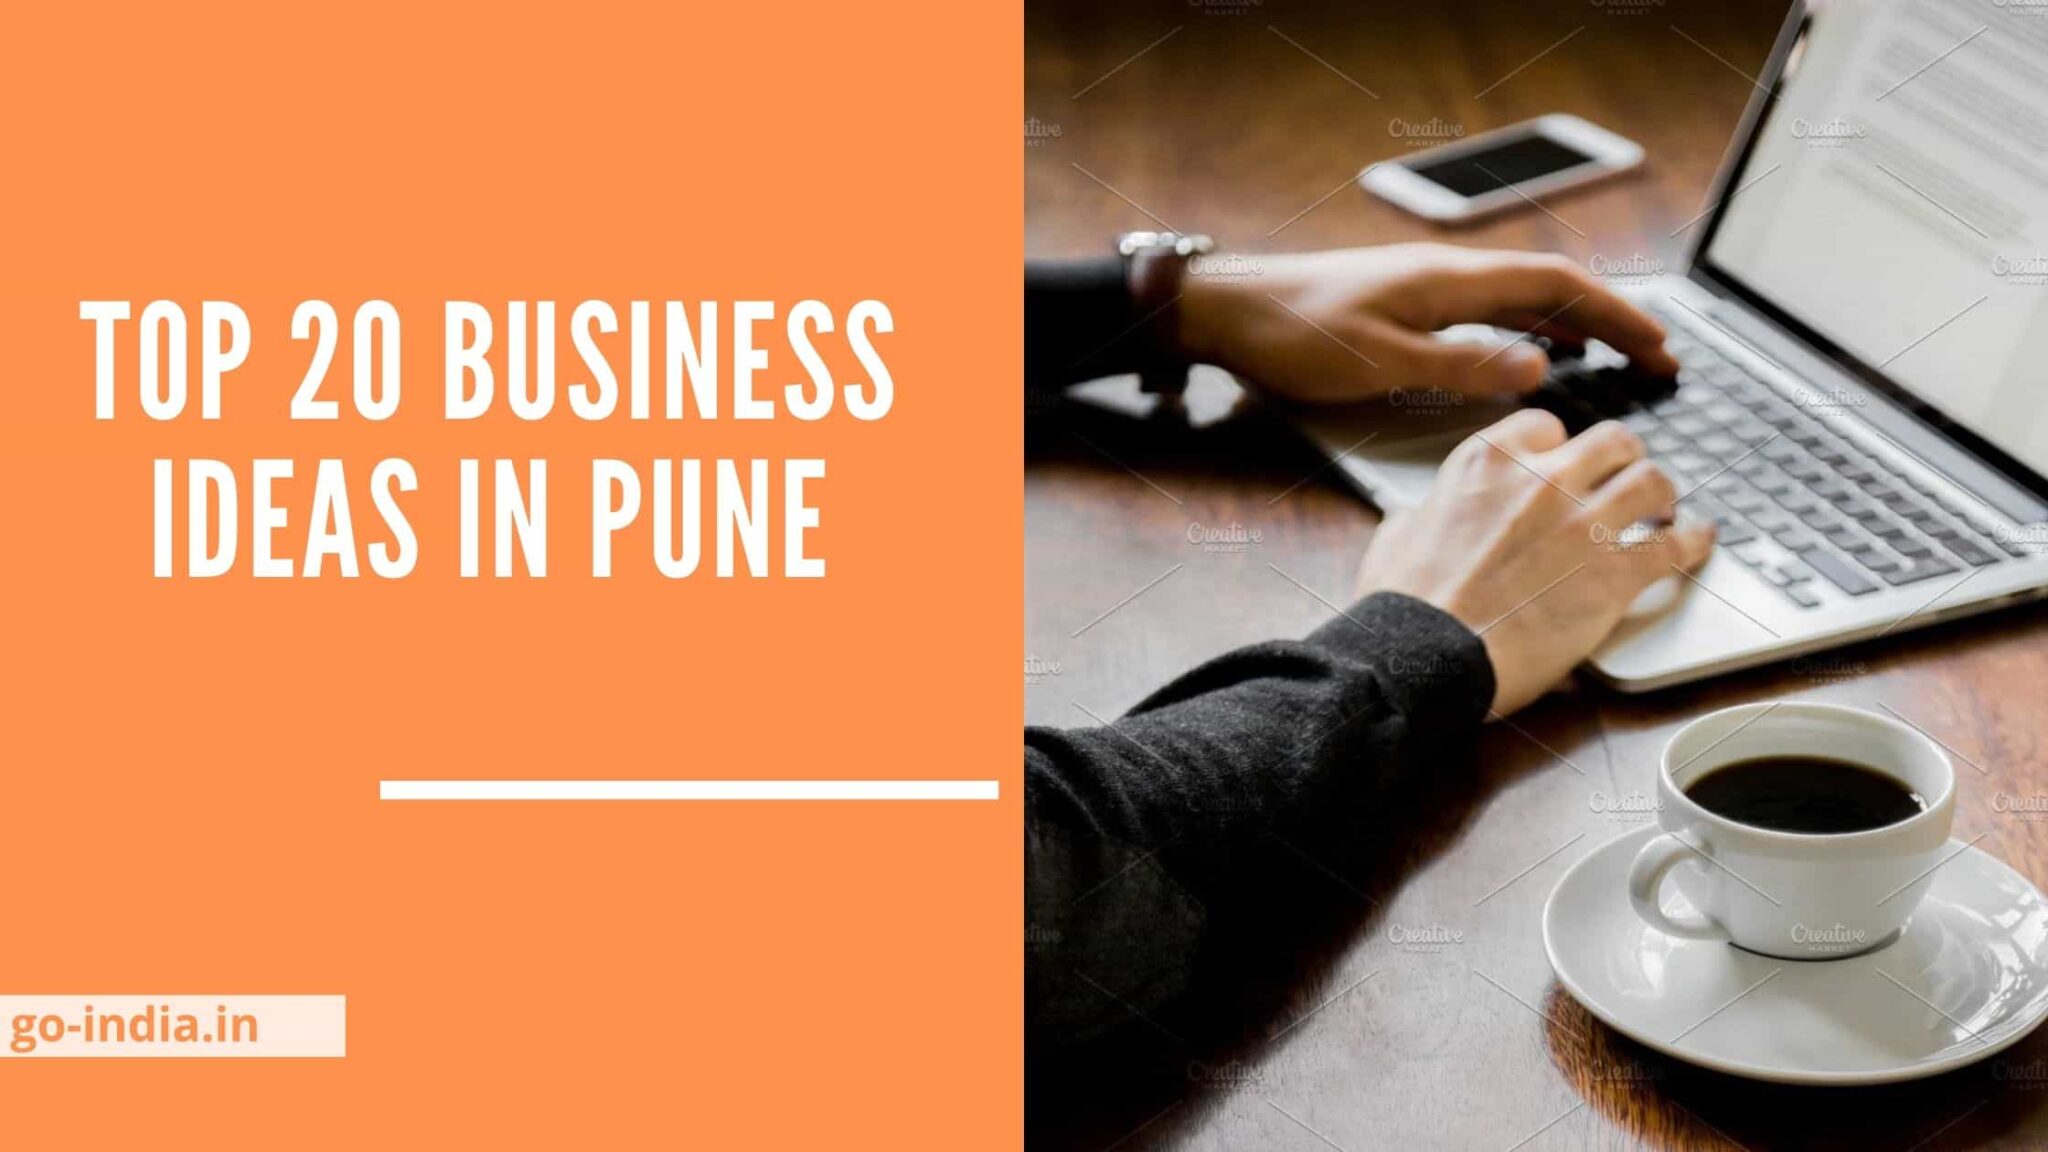 Top 20 Business Ideas in Pune | Go India